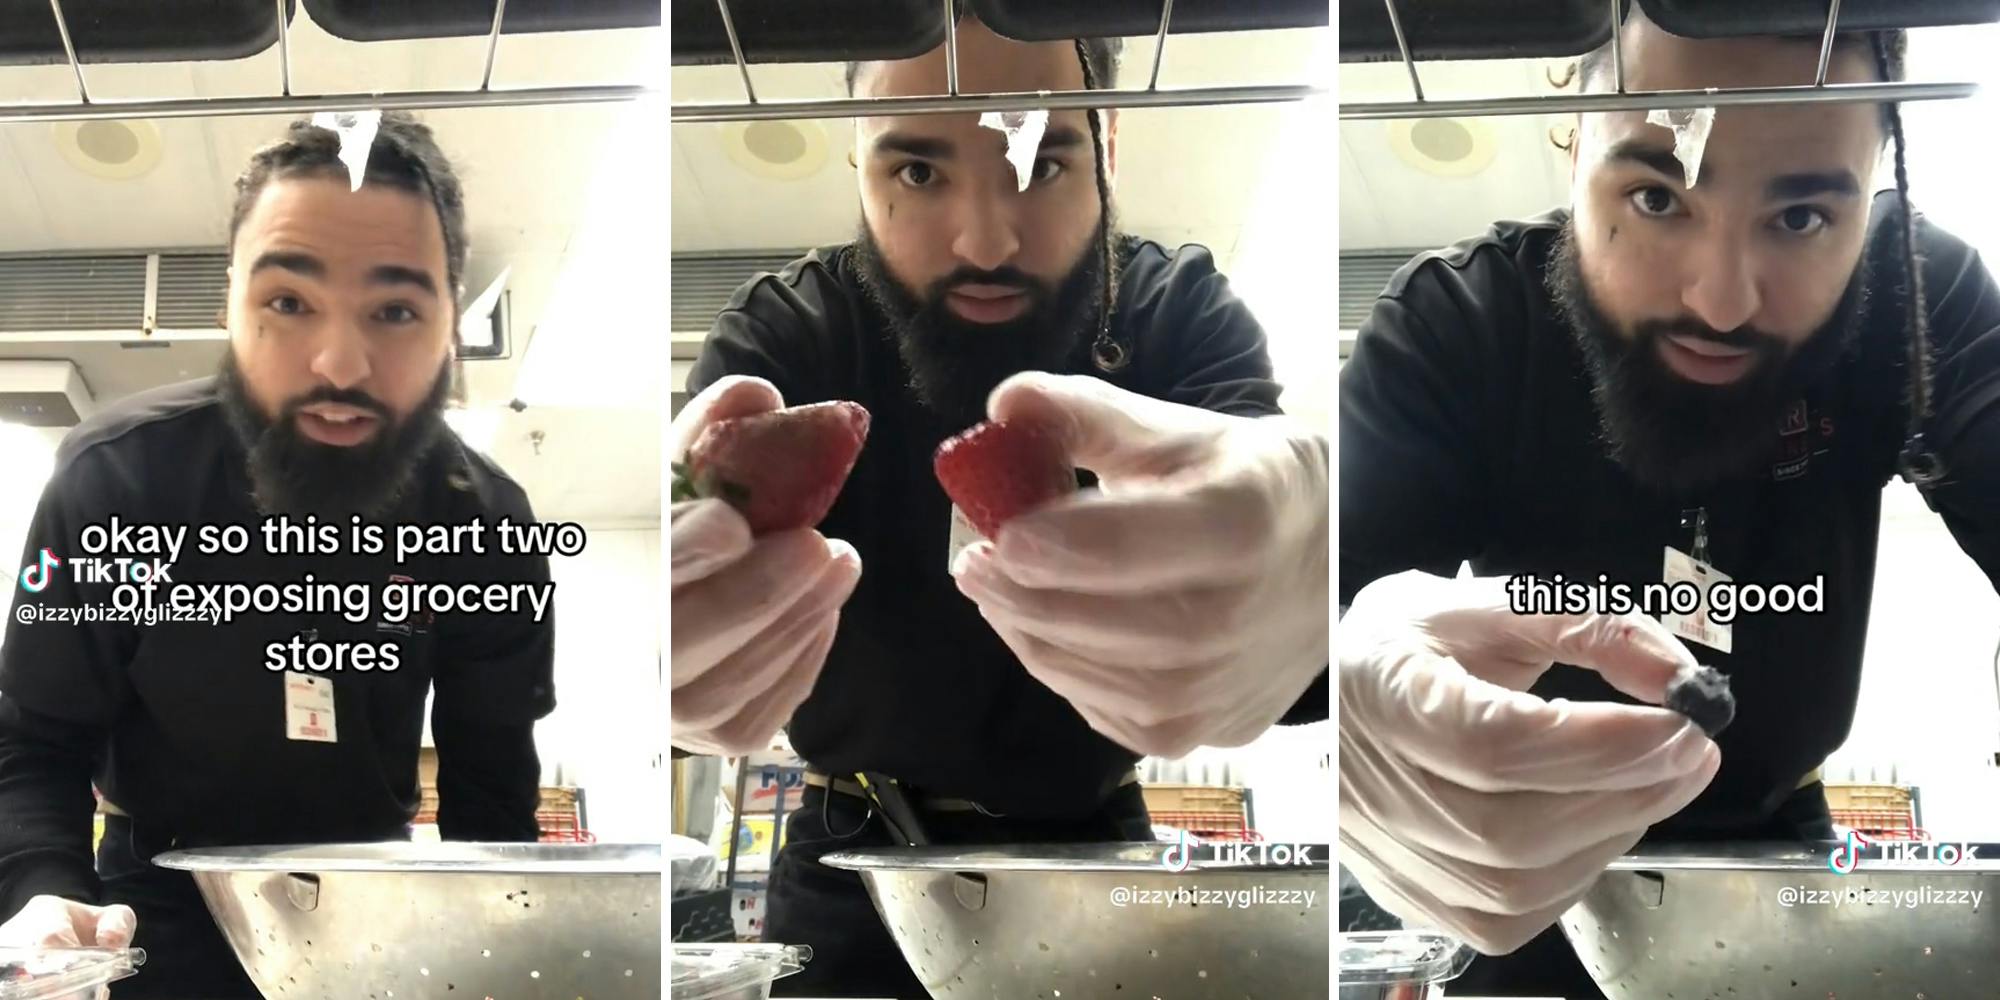 man picking moldy fruit from containers with gloves caption "okay so this is part two of exposing grocery stores" (l) and "this is no good" (r)